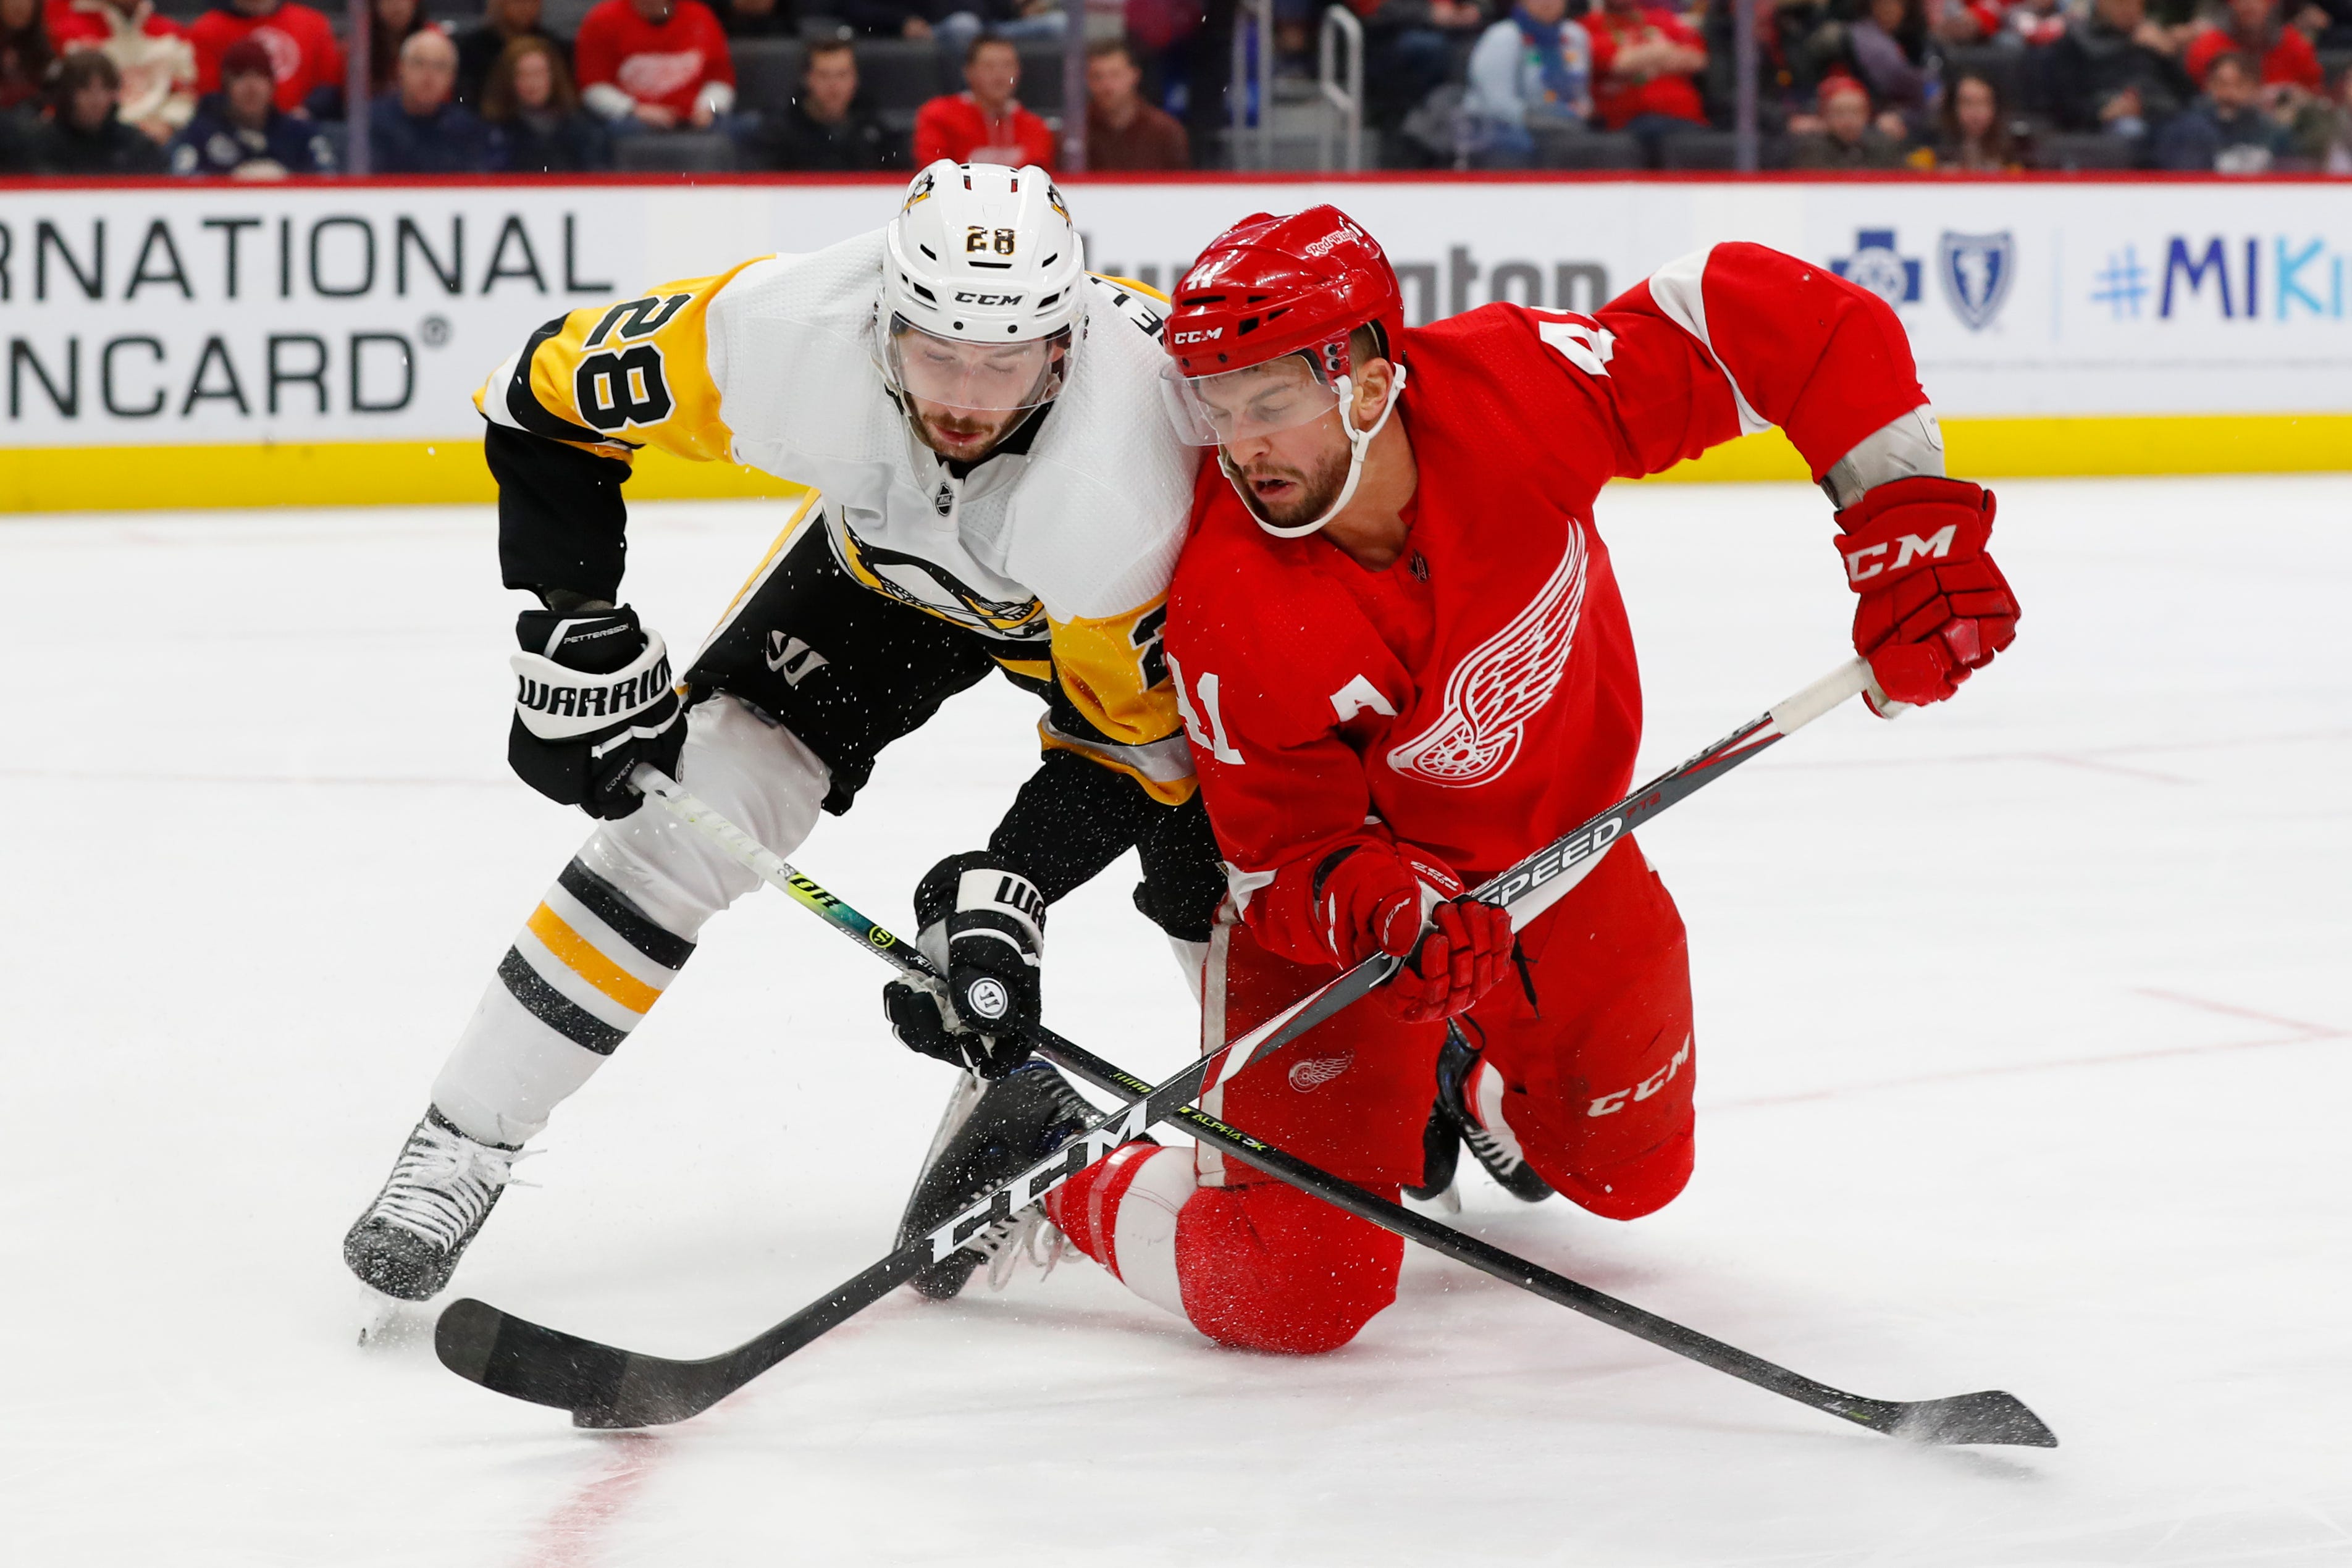 Pittsburgh Penguins defenseman Marcus Pettersson (28) and Detroit Red Wings center Luke Glendening (41) battle for the puck in the second period.